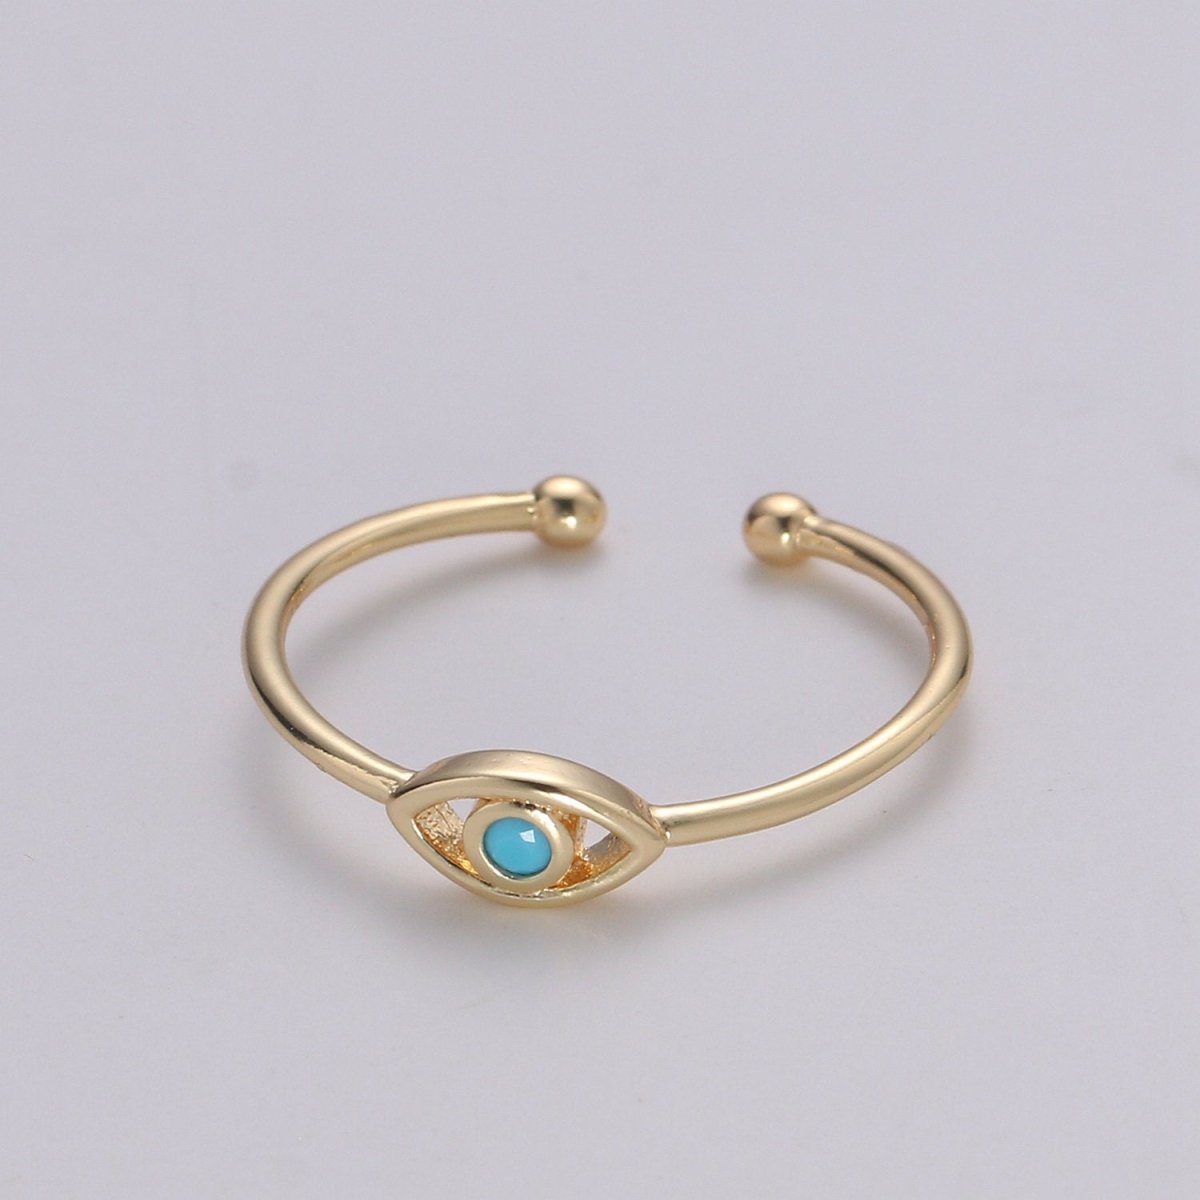 Dainty Turquoise Evil Eye Stacking Ring, Gold Minimalist Ring, Simple Open Ring, Thin Adjustable Ring, Amulet Jewelry Gift for her R-142 O-465 - DLUXCA